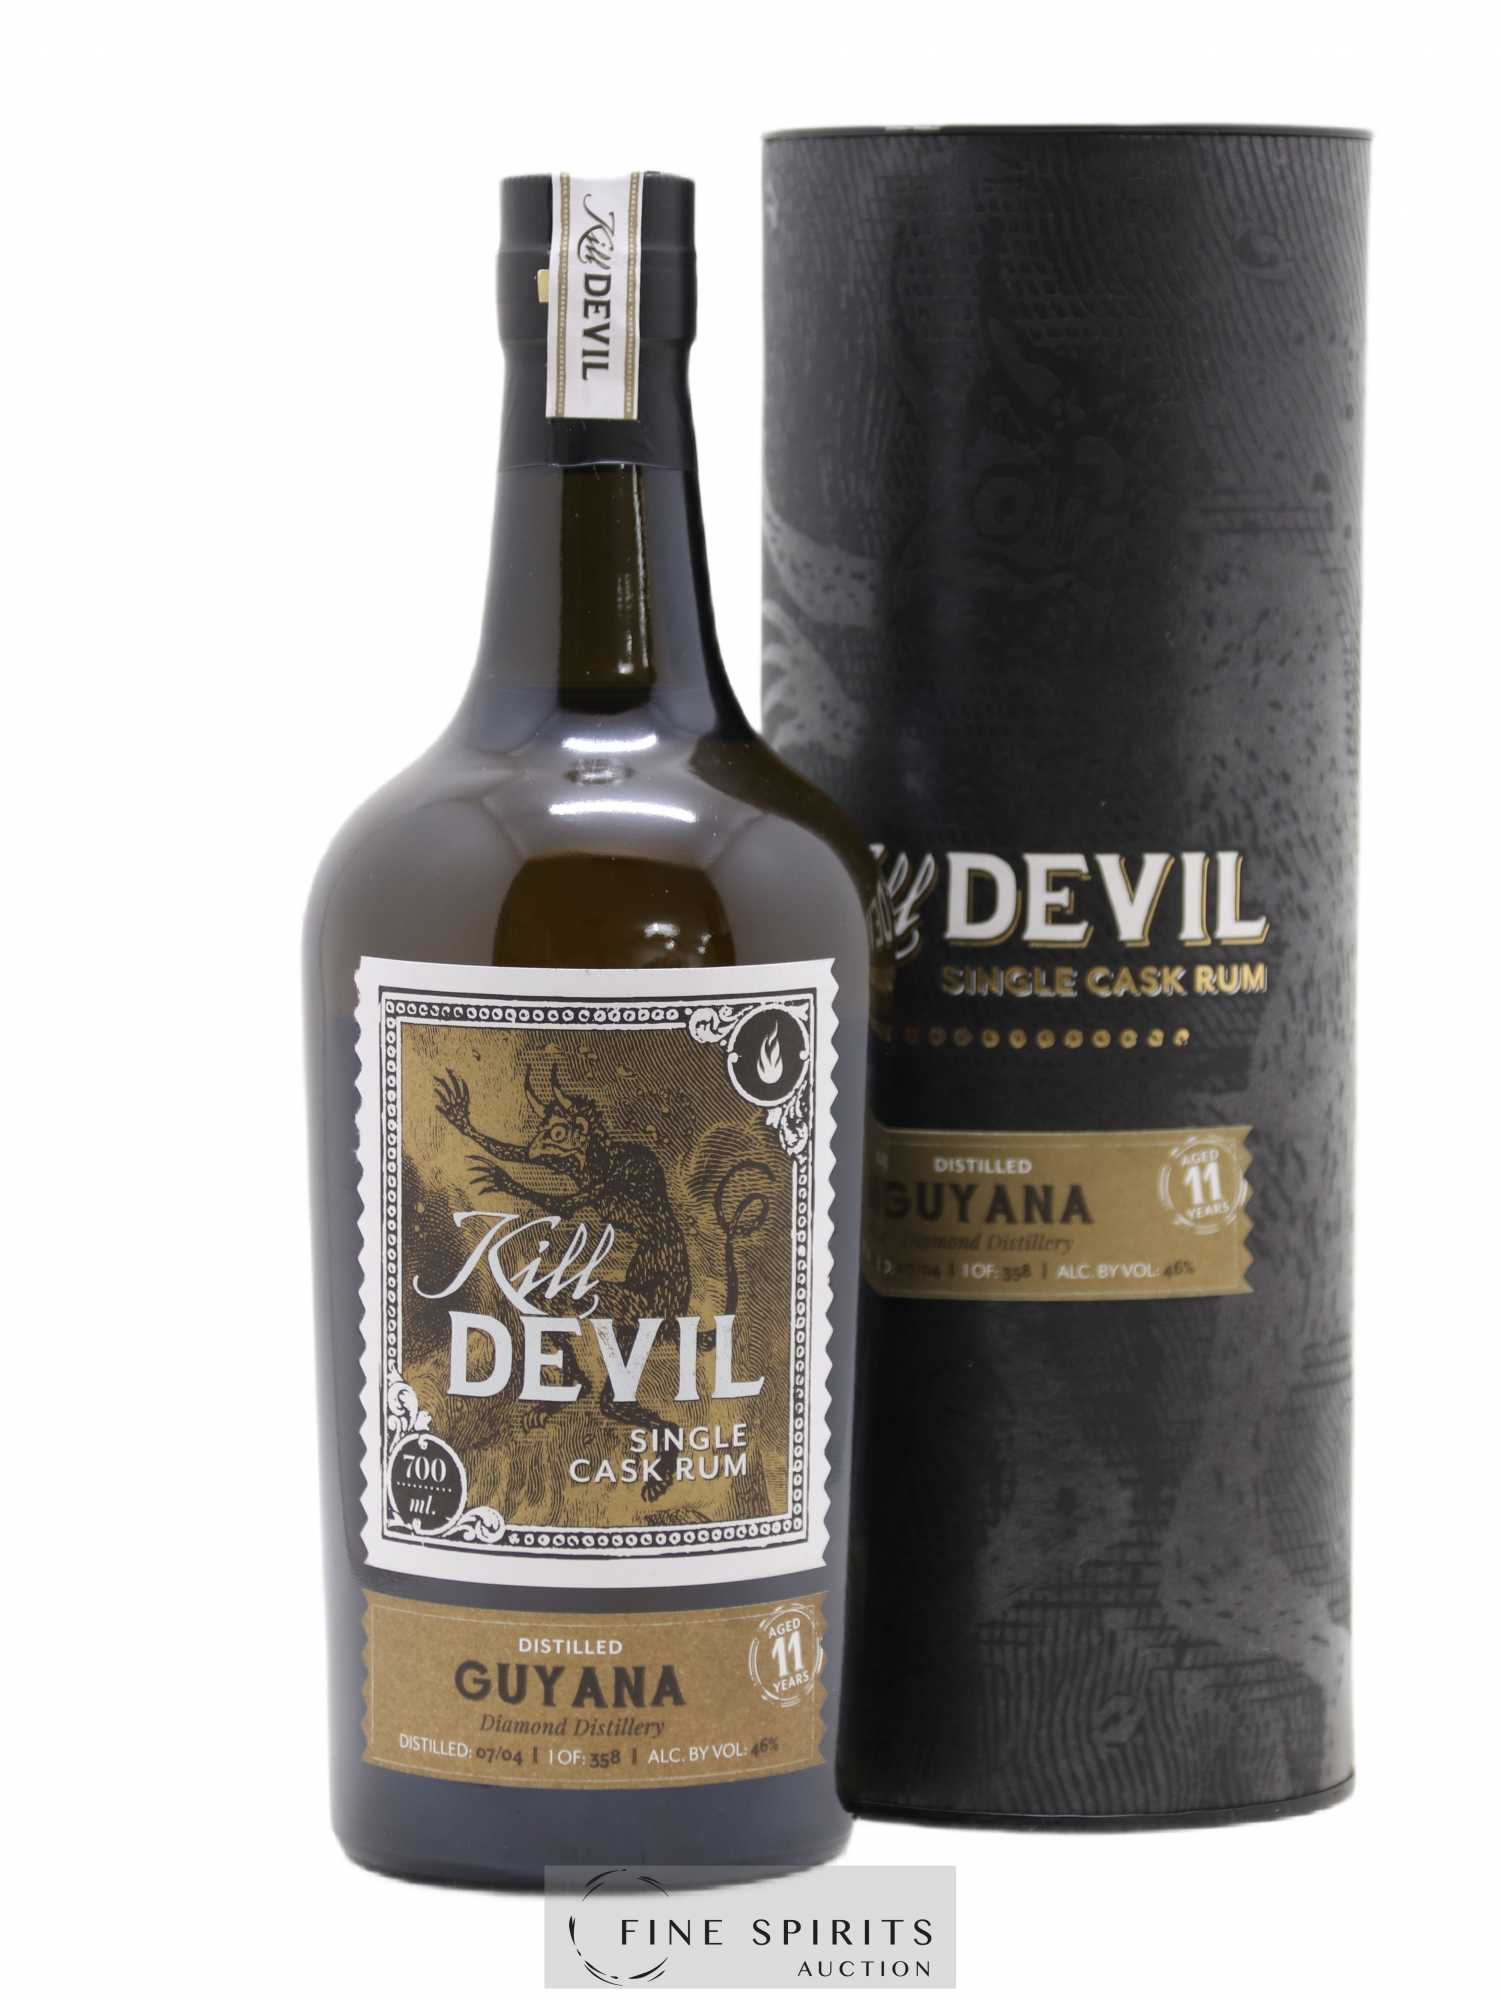 Kill Devil 11 years 2004 Edition Spirits One of 358 